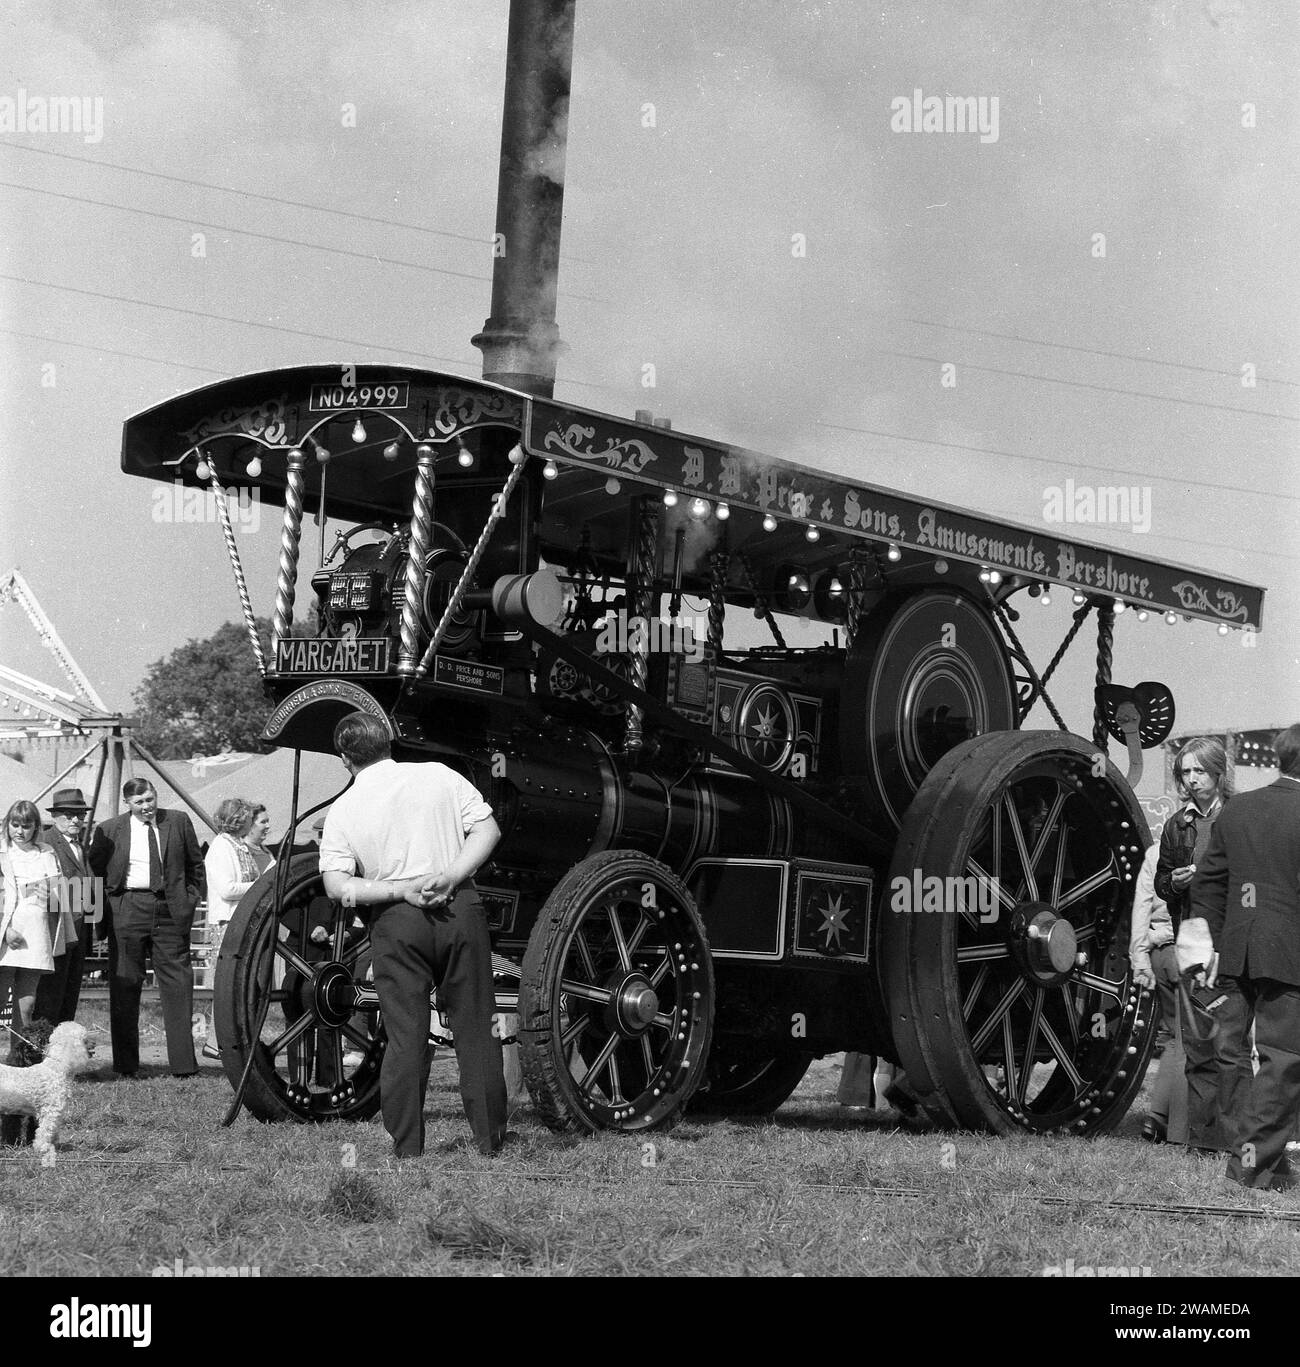 1970, historical, outside at a steam fair, visitors looking at the steam powered tractor, 'Margaret', built in 1922 and known as a Showmans Road Locomotive.  Maker's nameplate on front; C. Burrell & Sons Ltd, England. Number plate is NO 4999. Founded in 1770 and based at Thetford, Norfolk, Charles Burrell & Sons were builders of steam traction engines and related machinery and traded until the late 1920s, when the internal combustion engine became a more effective alternative to steam power. Stock Photo